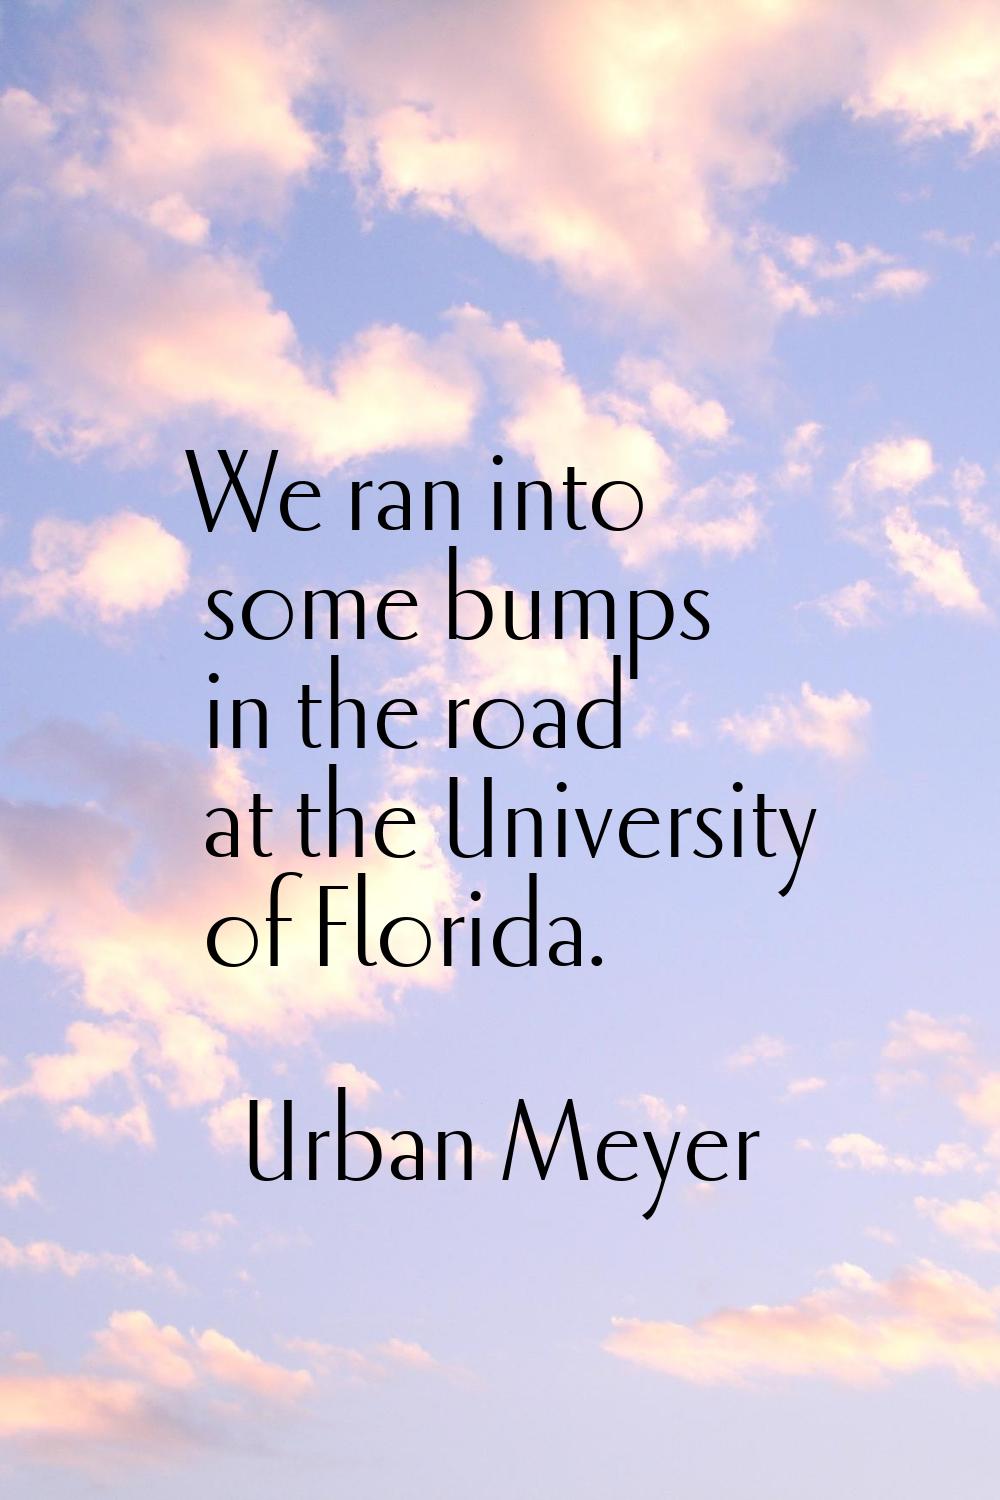 We ran into some bumps in the road at the University of Florida.